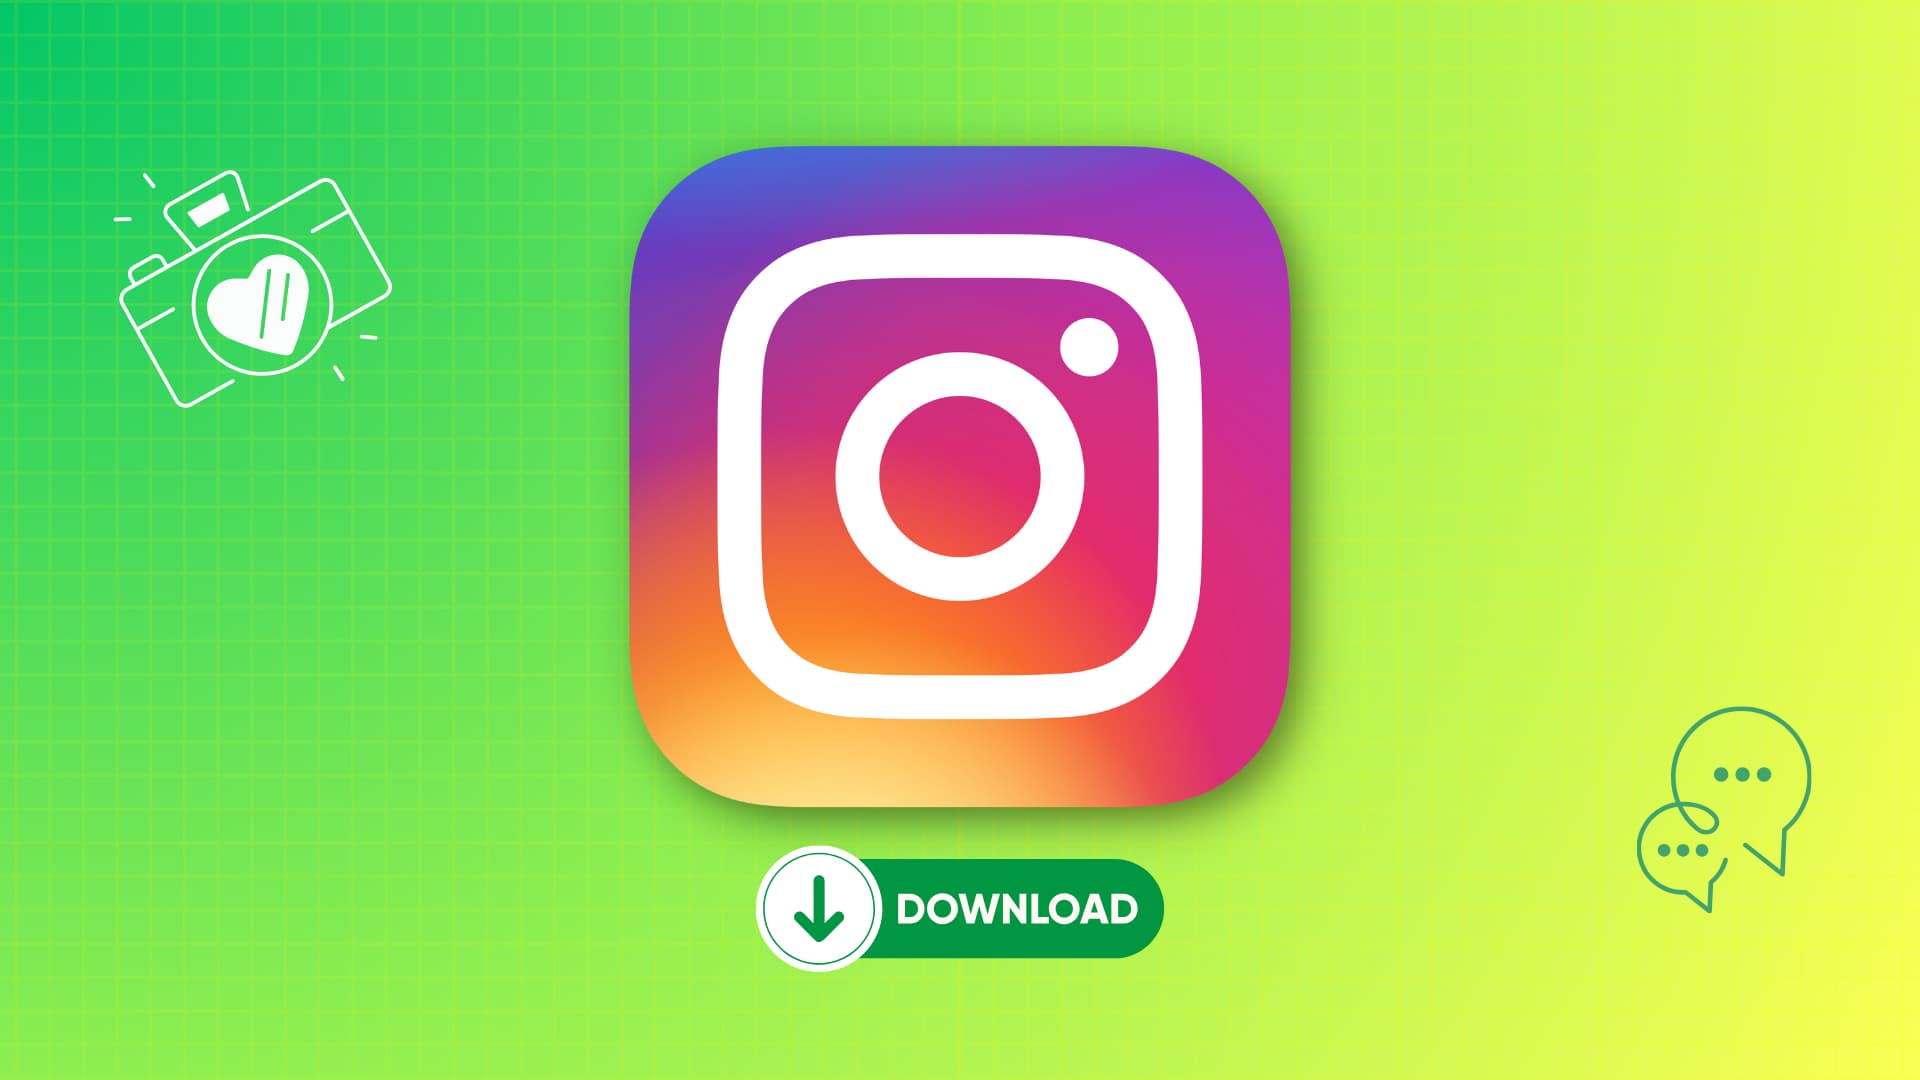 Instagram app icon with a download button under it